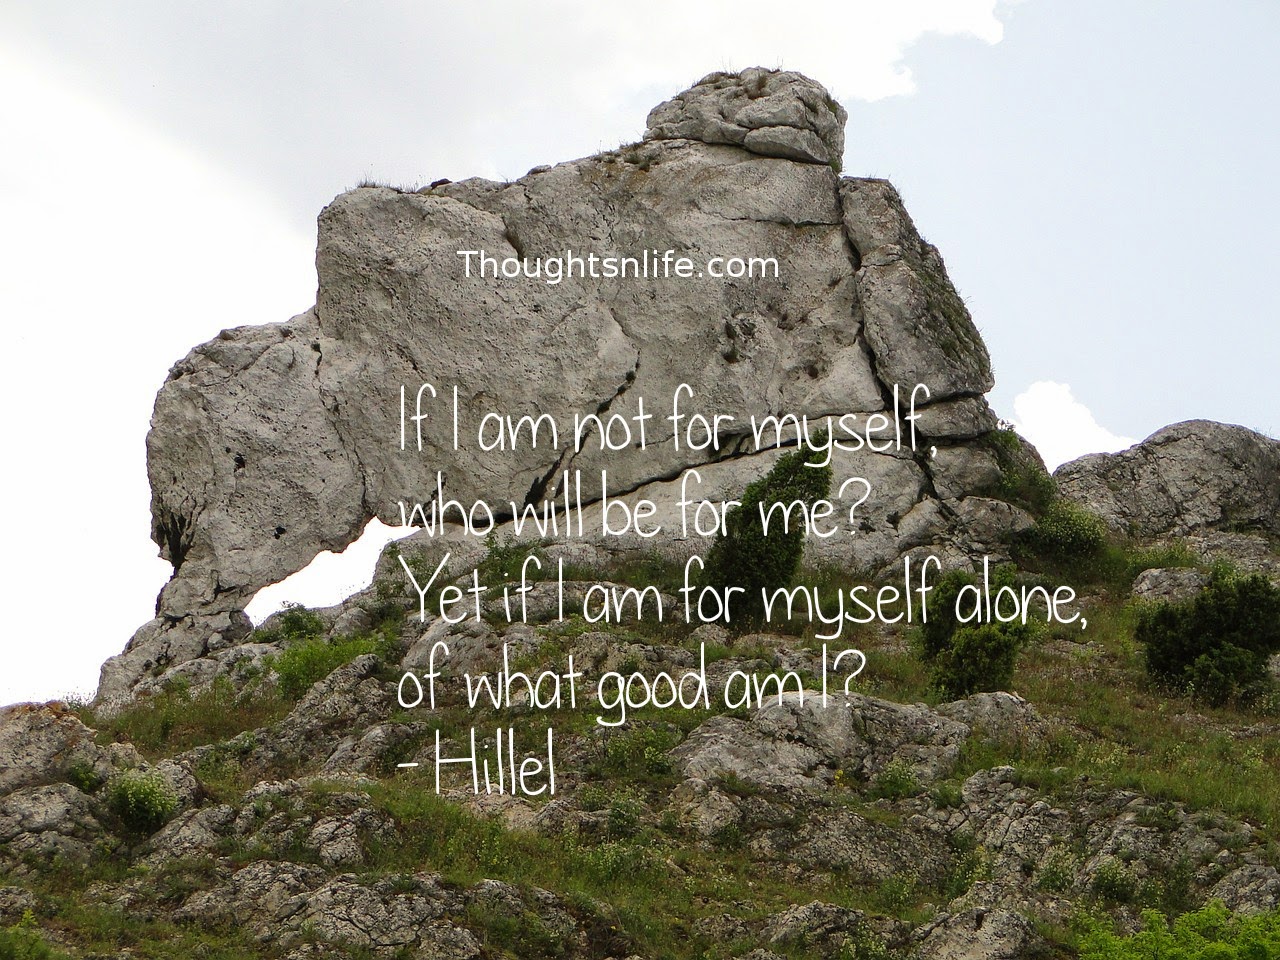 Thoughtsnlife.com: If I am not for myself, who will be for me? Yet if I am for myself alone, of what good am I? - Hillel